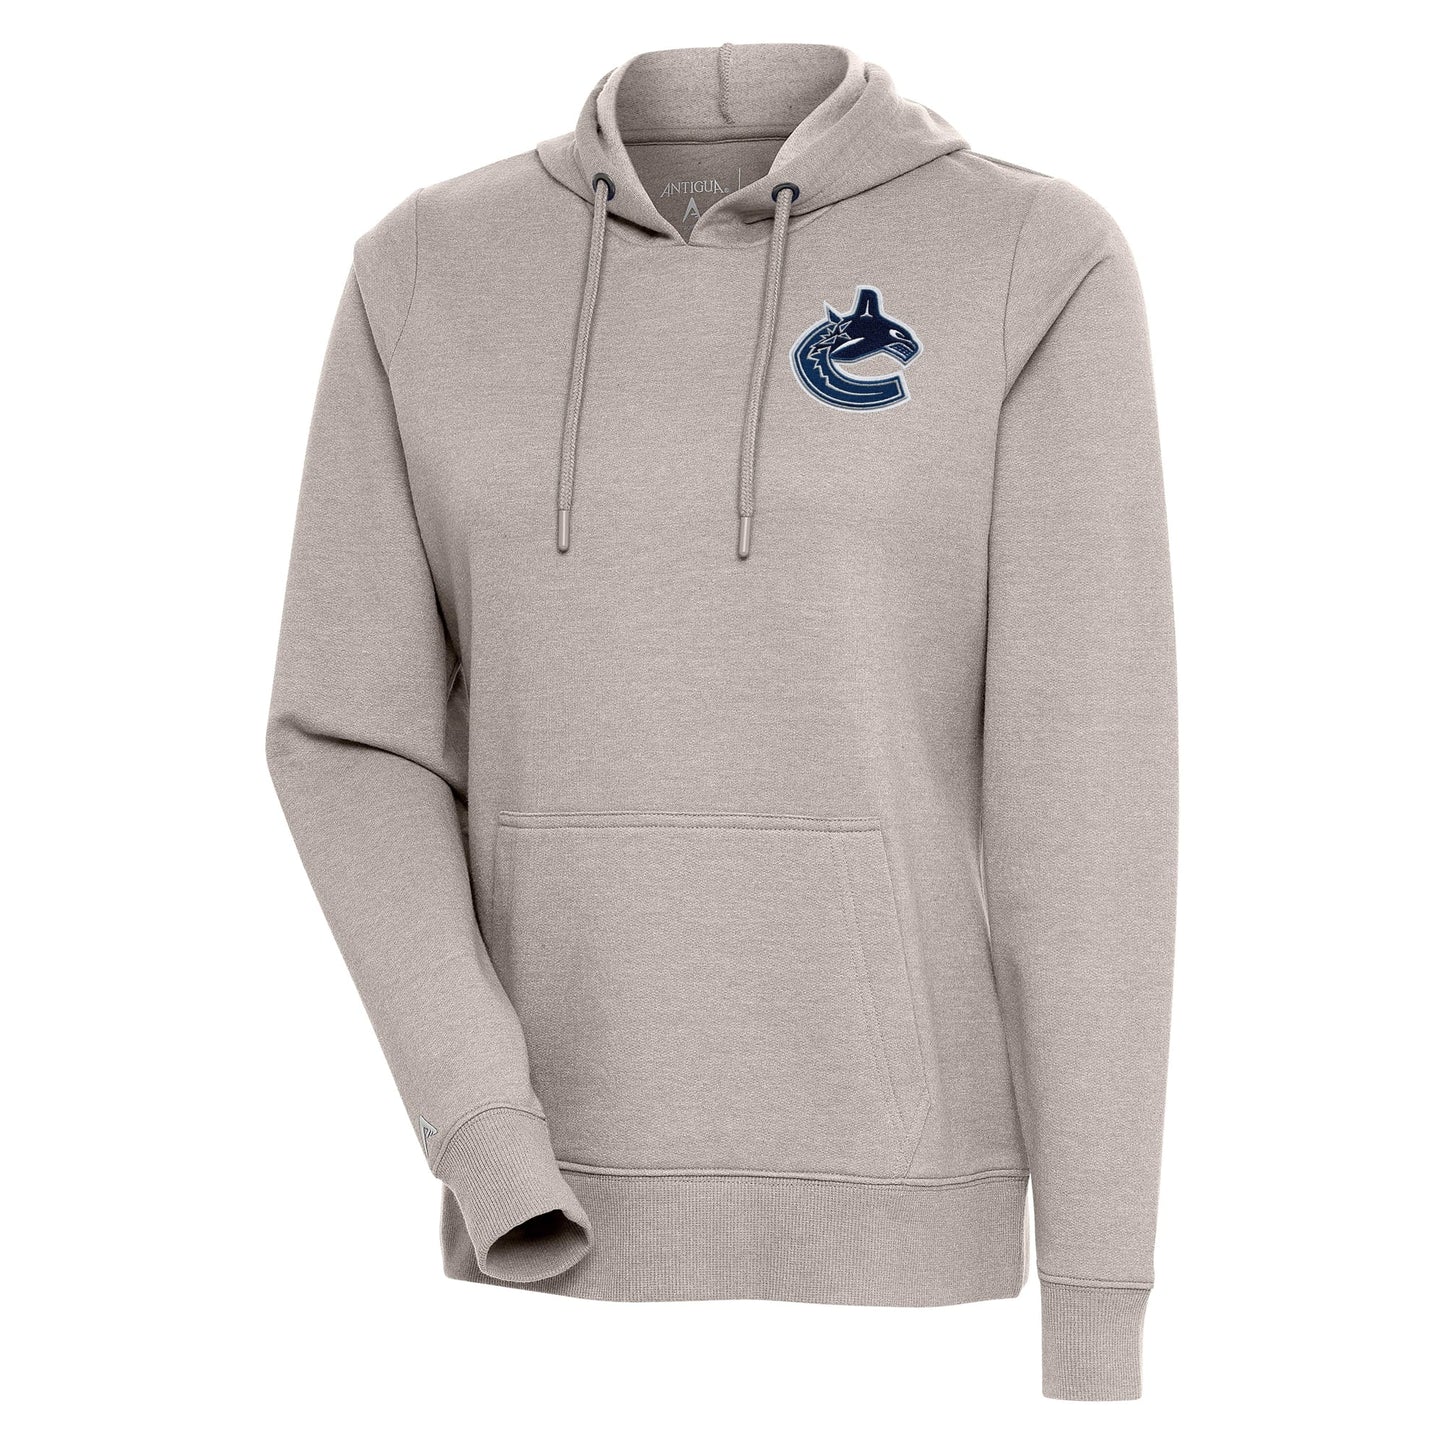 Women's Antigua Oatmeal Vancouver Canucks Action Chenille Pullover Hoodie